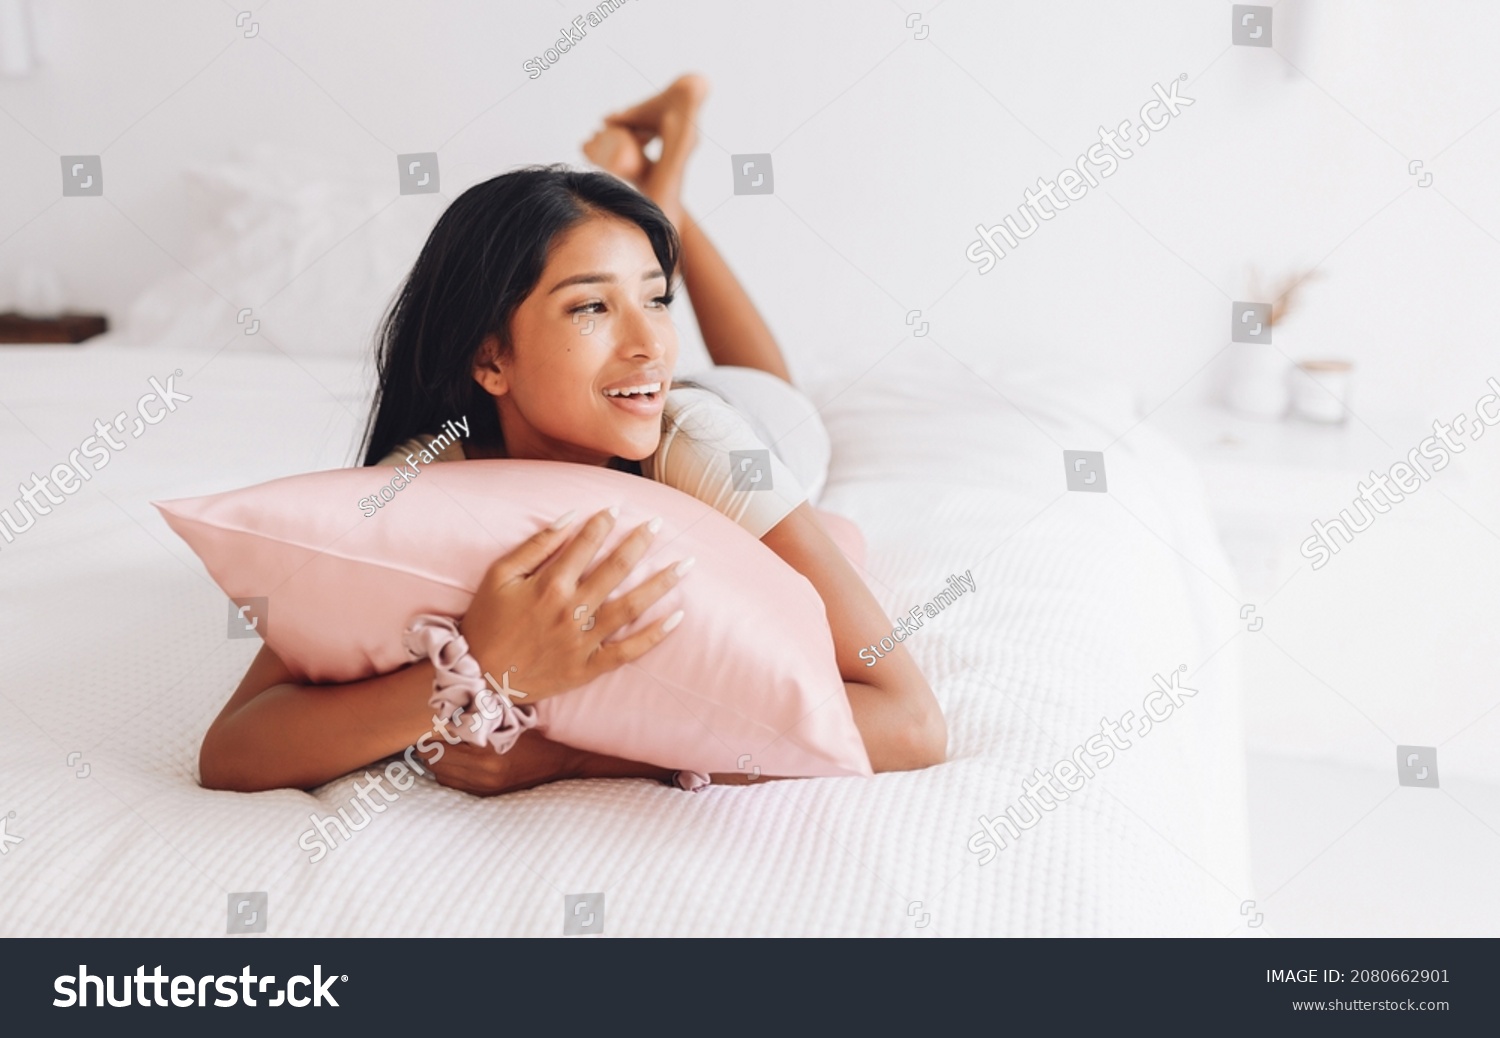 Beautiful Indonesian girl lying on a pink pillow with a silk pillowcase.
 #2080662901